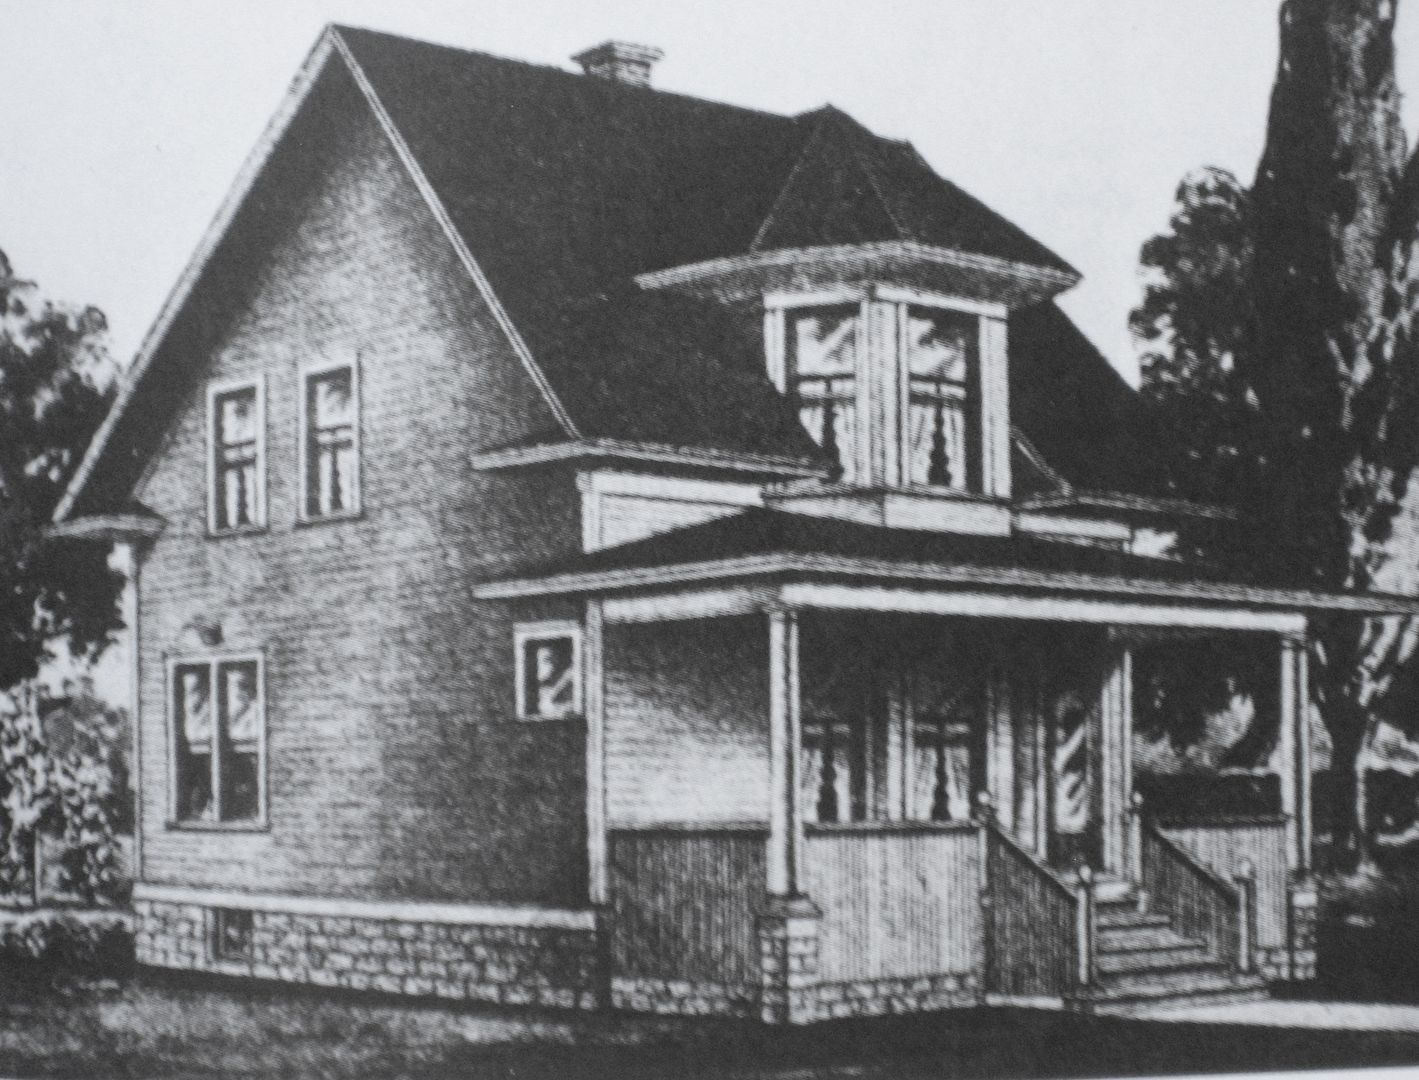 And a very early Sears House, Model 190 (1912 catalog). 